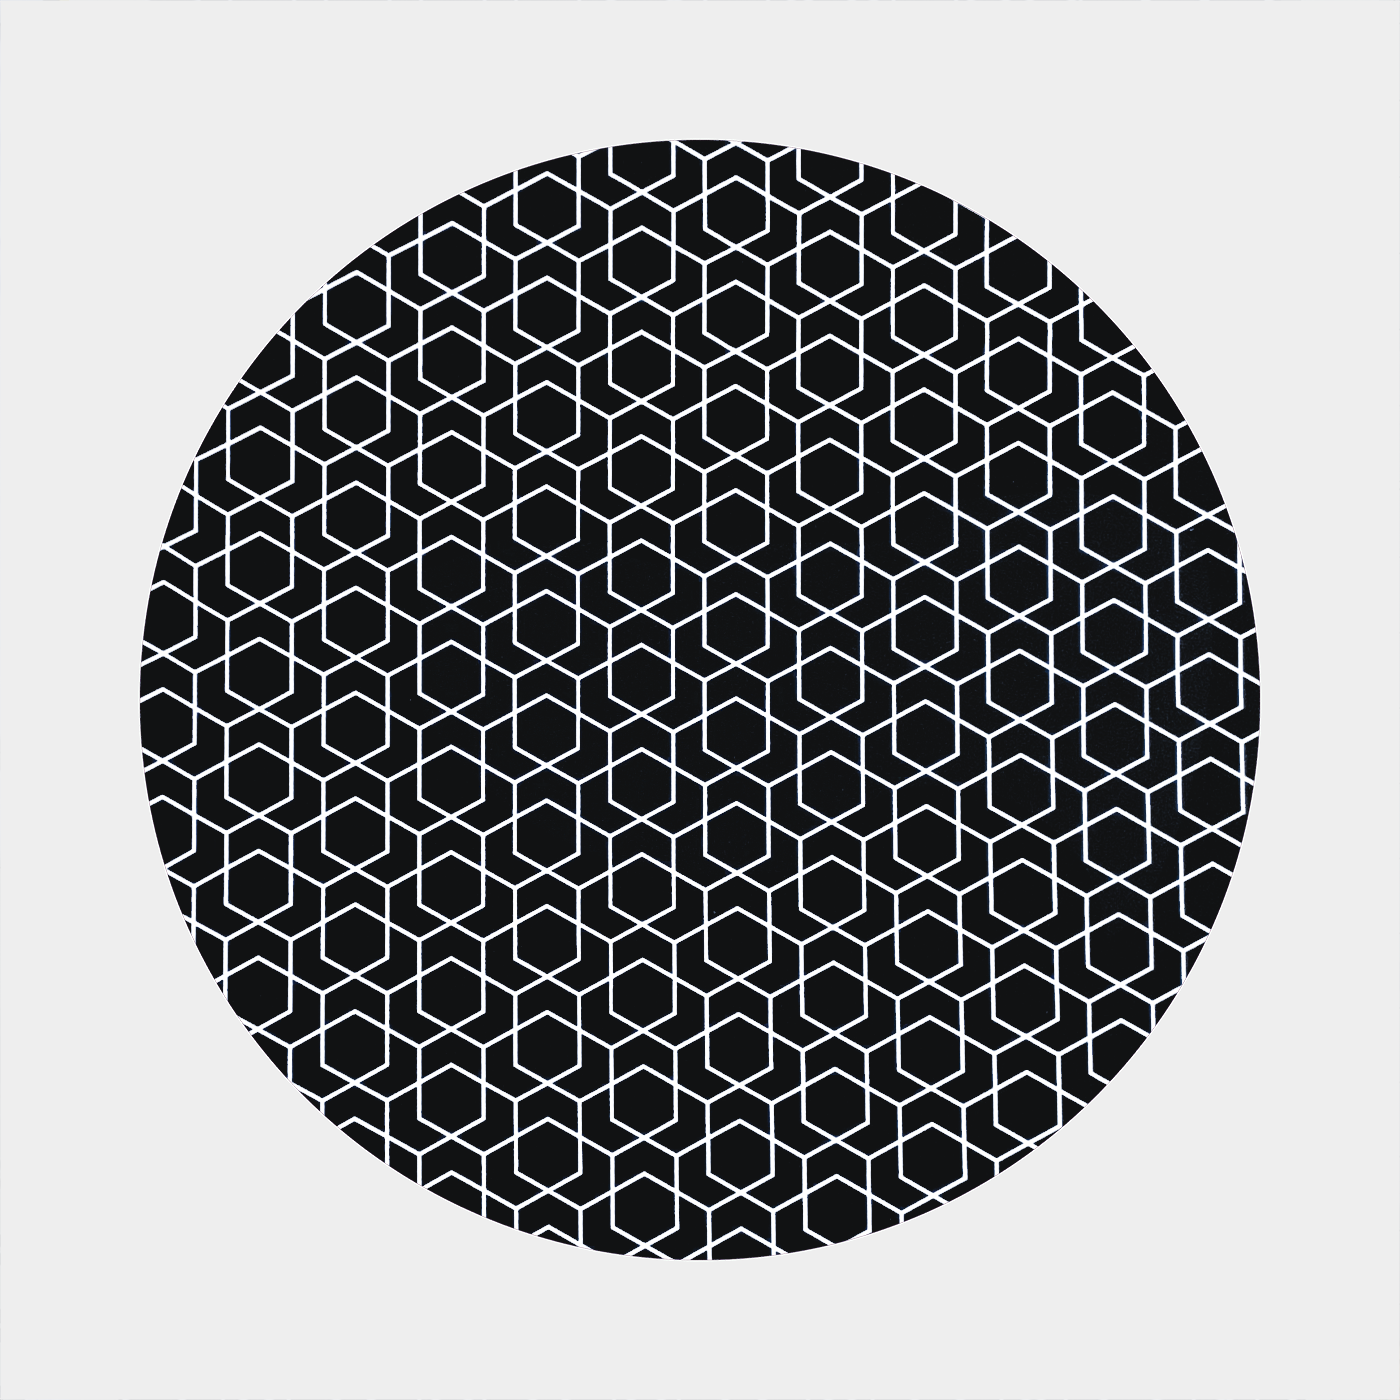 Pattern with black background and white geometric pattern